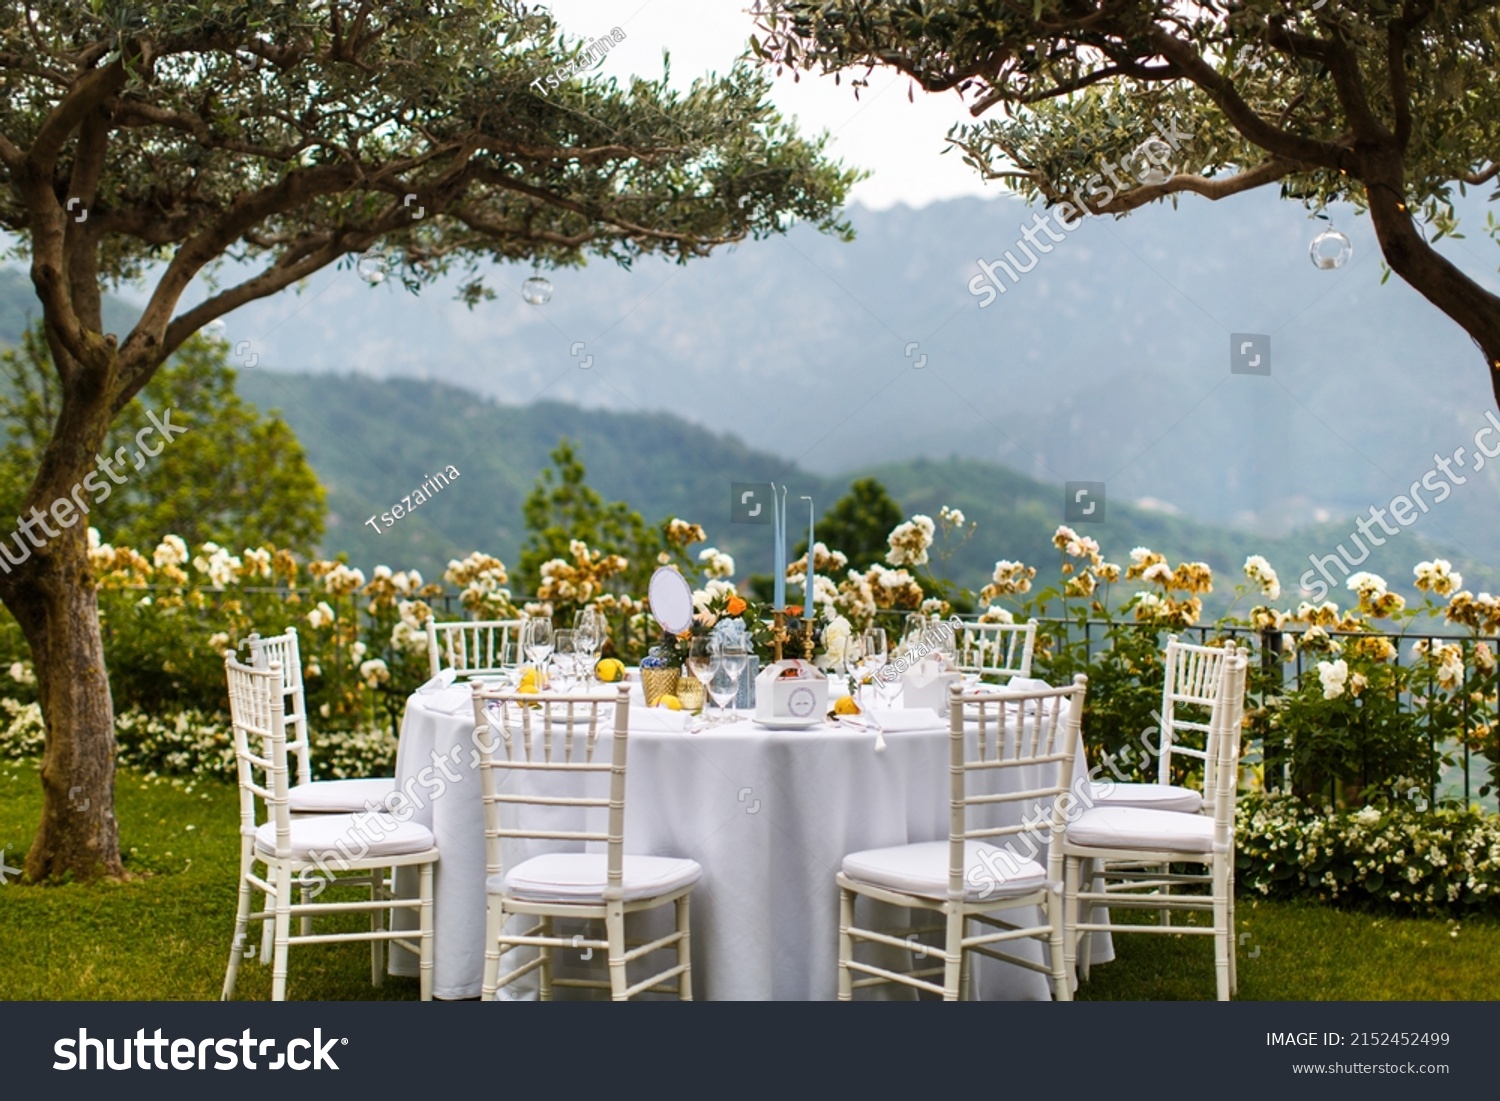 Table set for wedding or another catered event dinner in the garden #2152452499